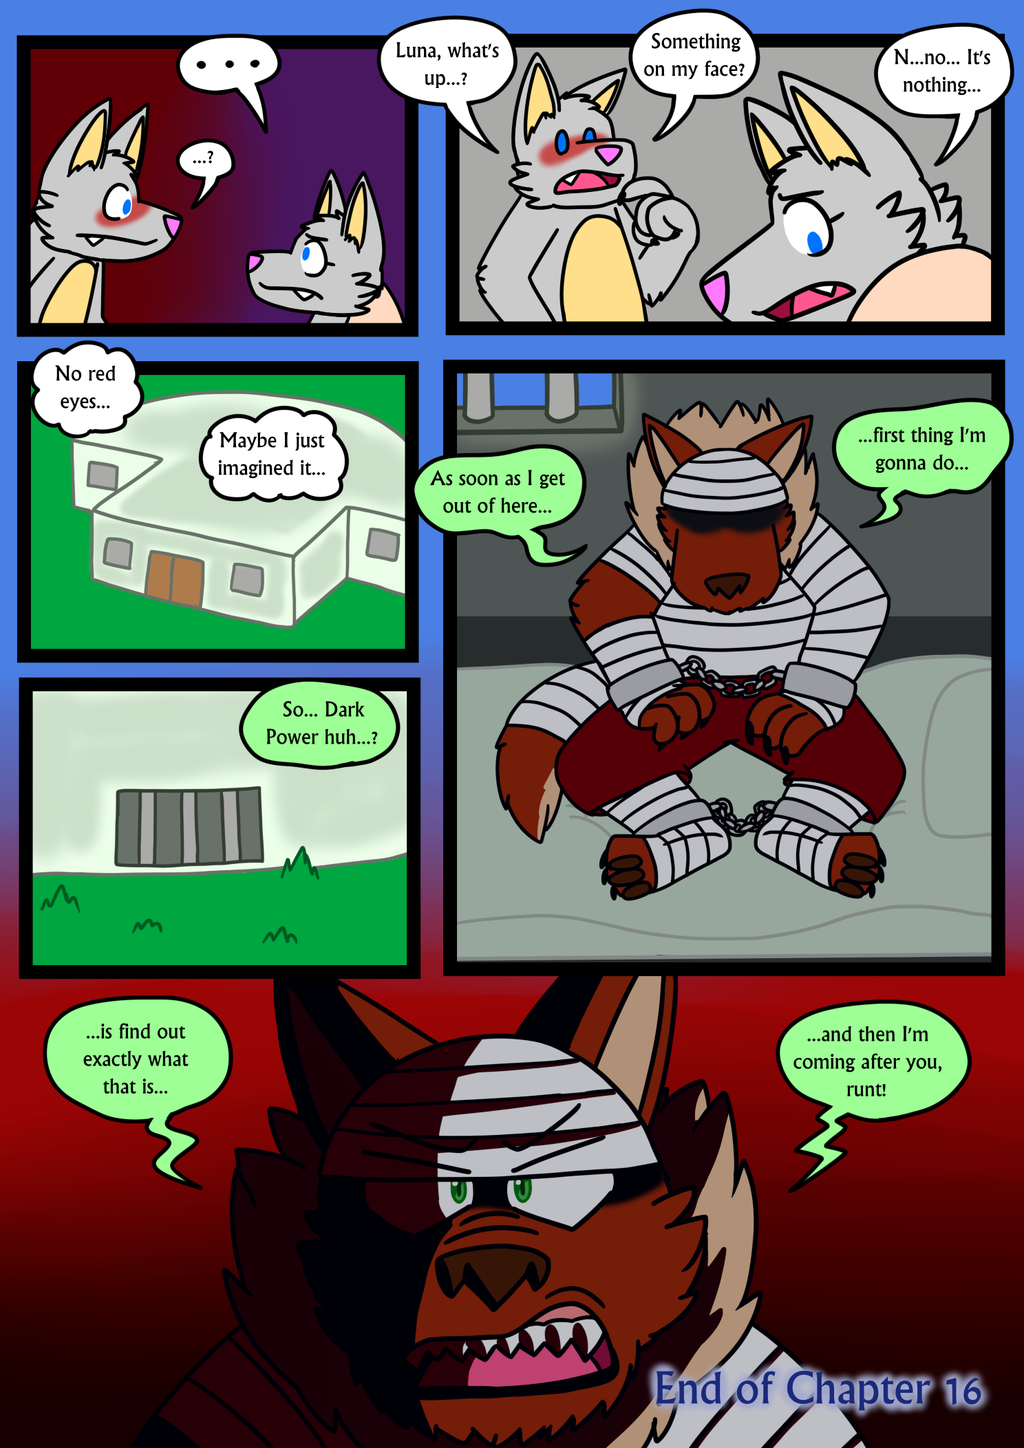 Lubo Chapter 16 Page 30 (Last)